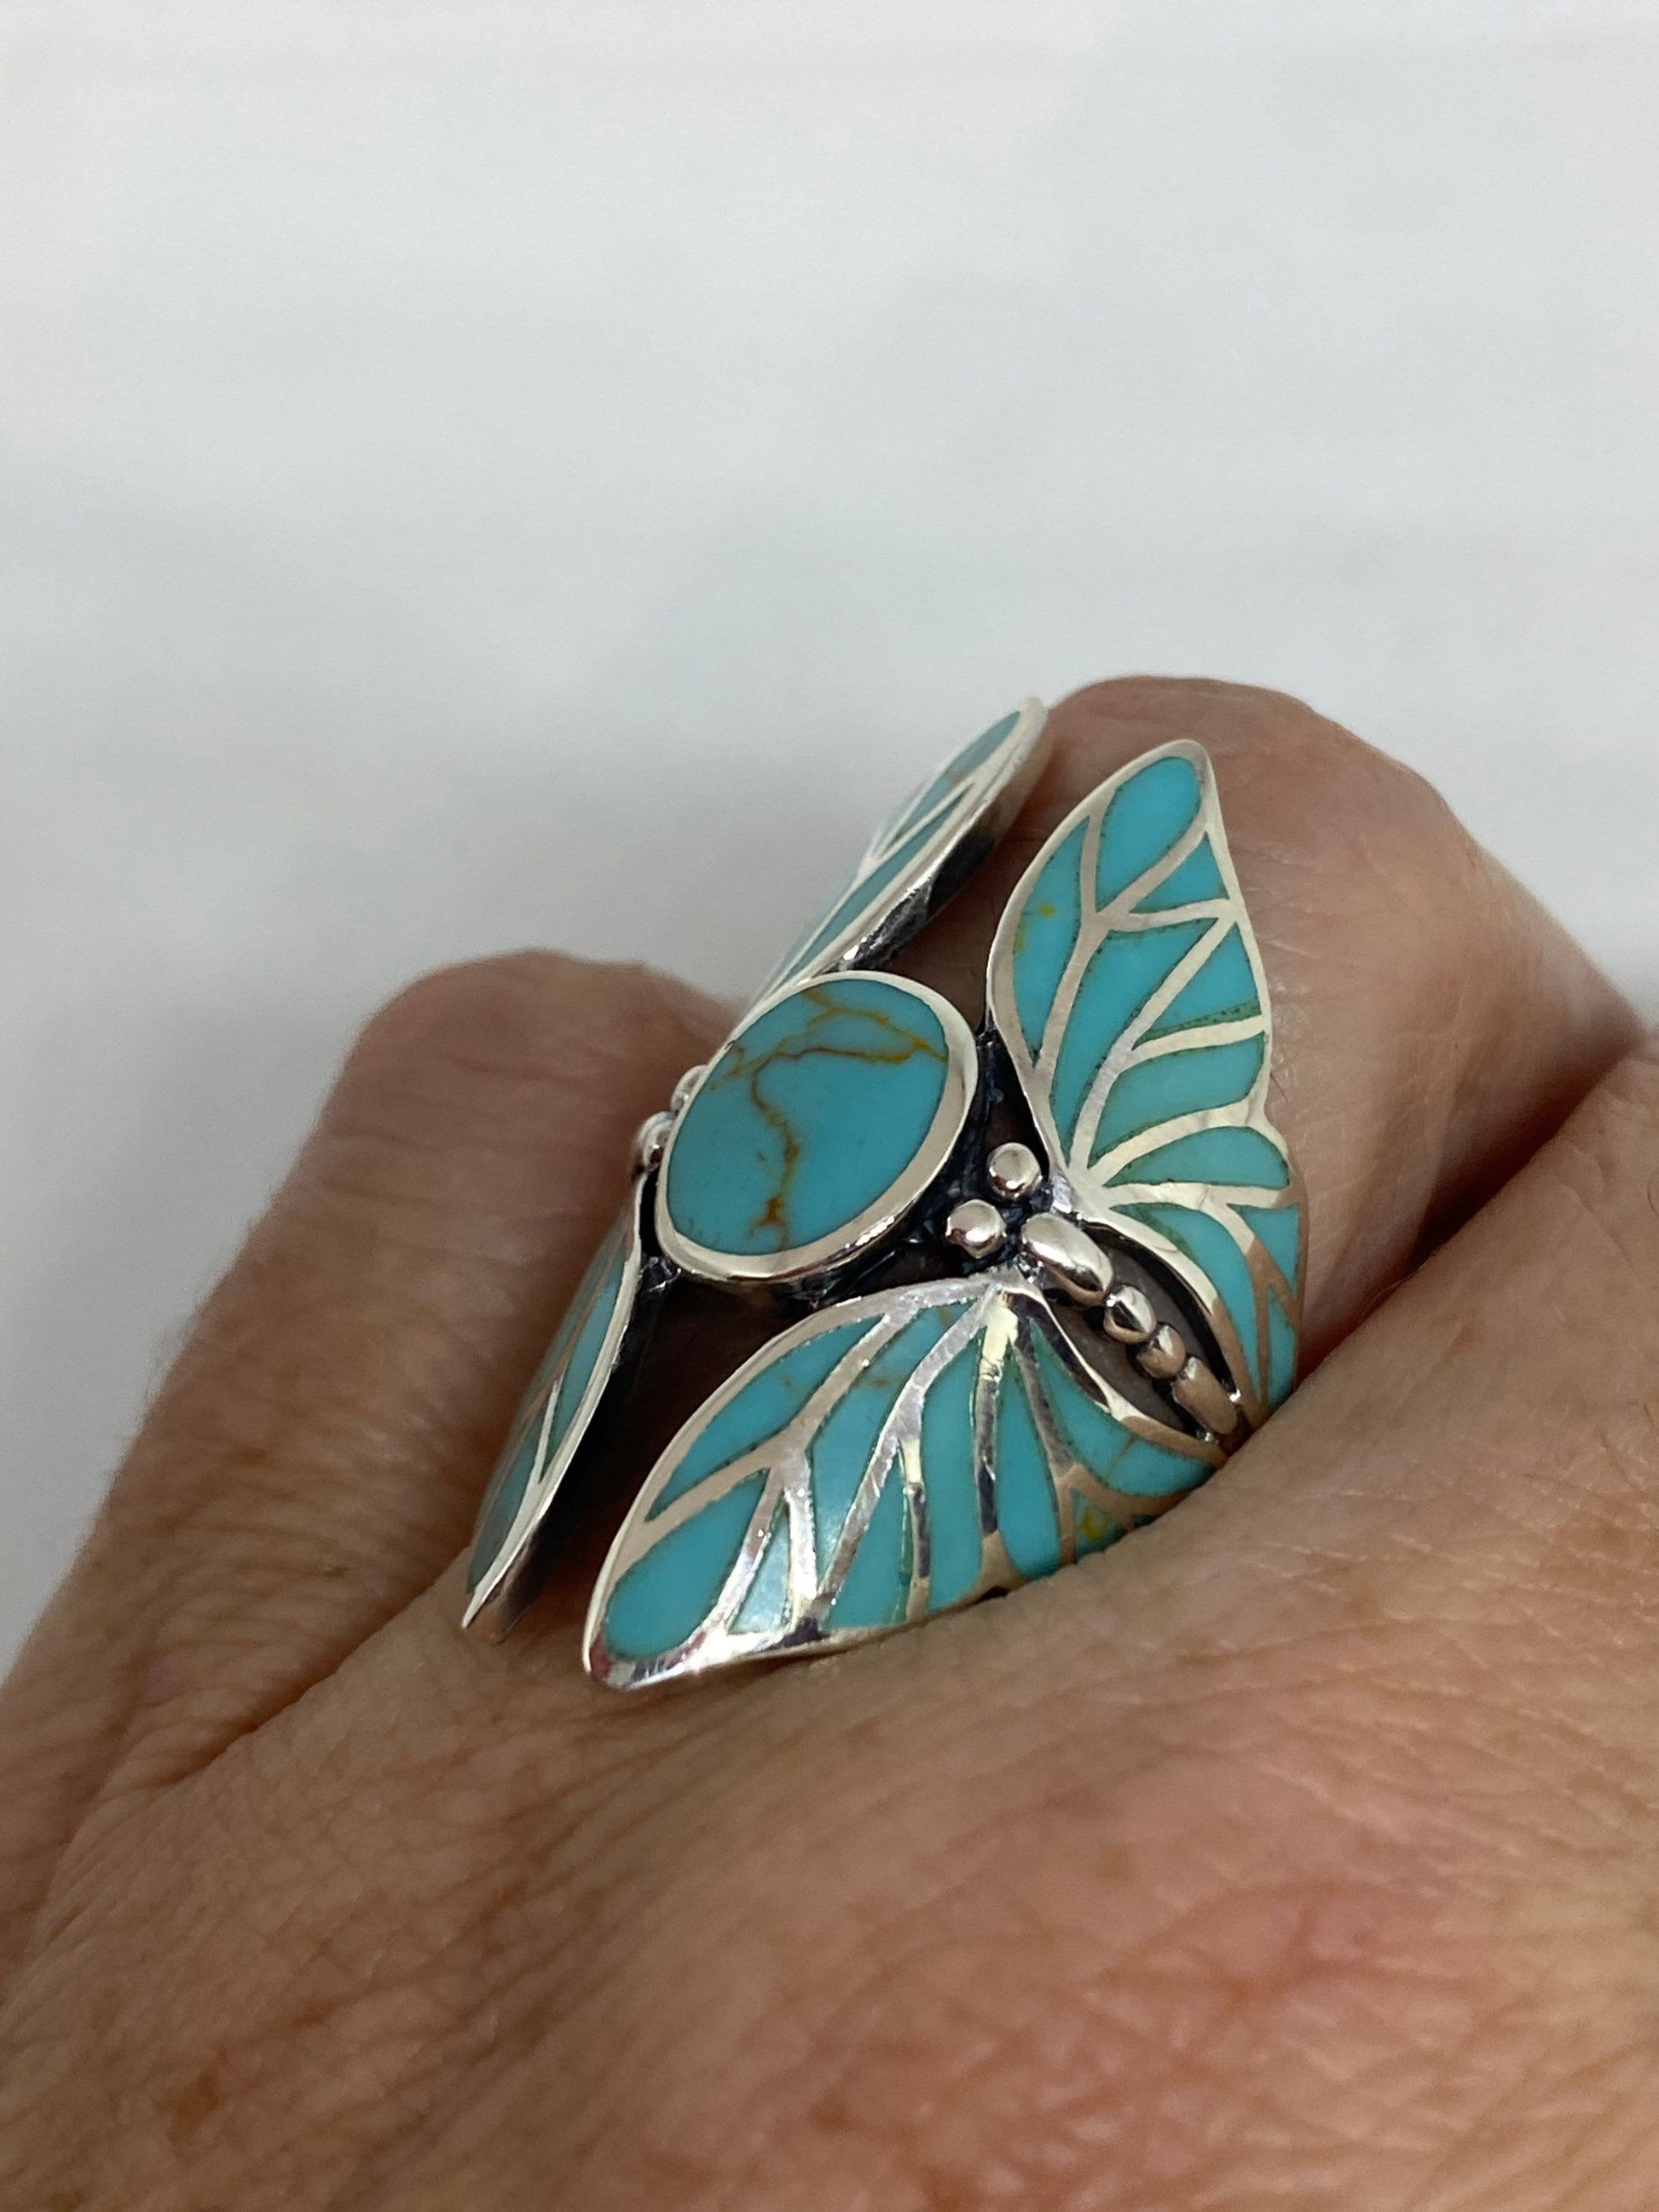 Antique Deco Turquoise Inlay Lunar Moth 925 Sterling Silver Ring